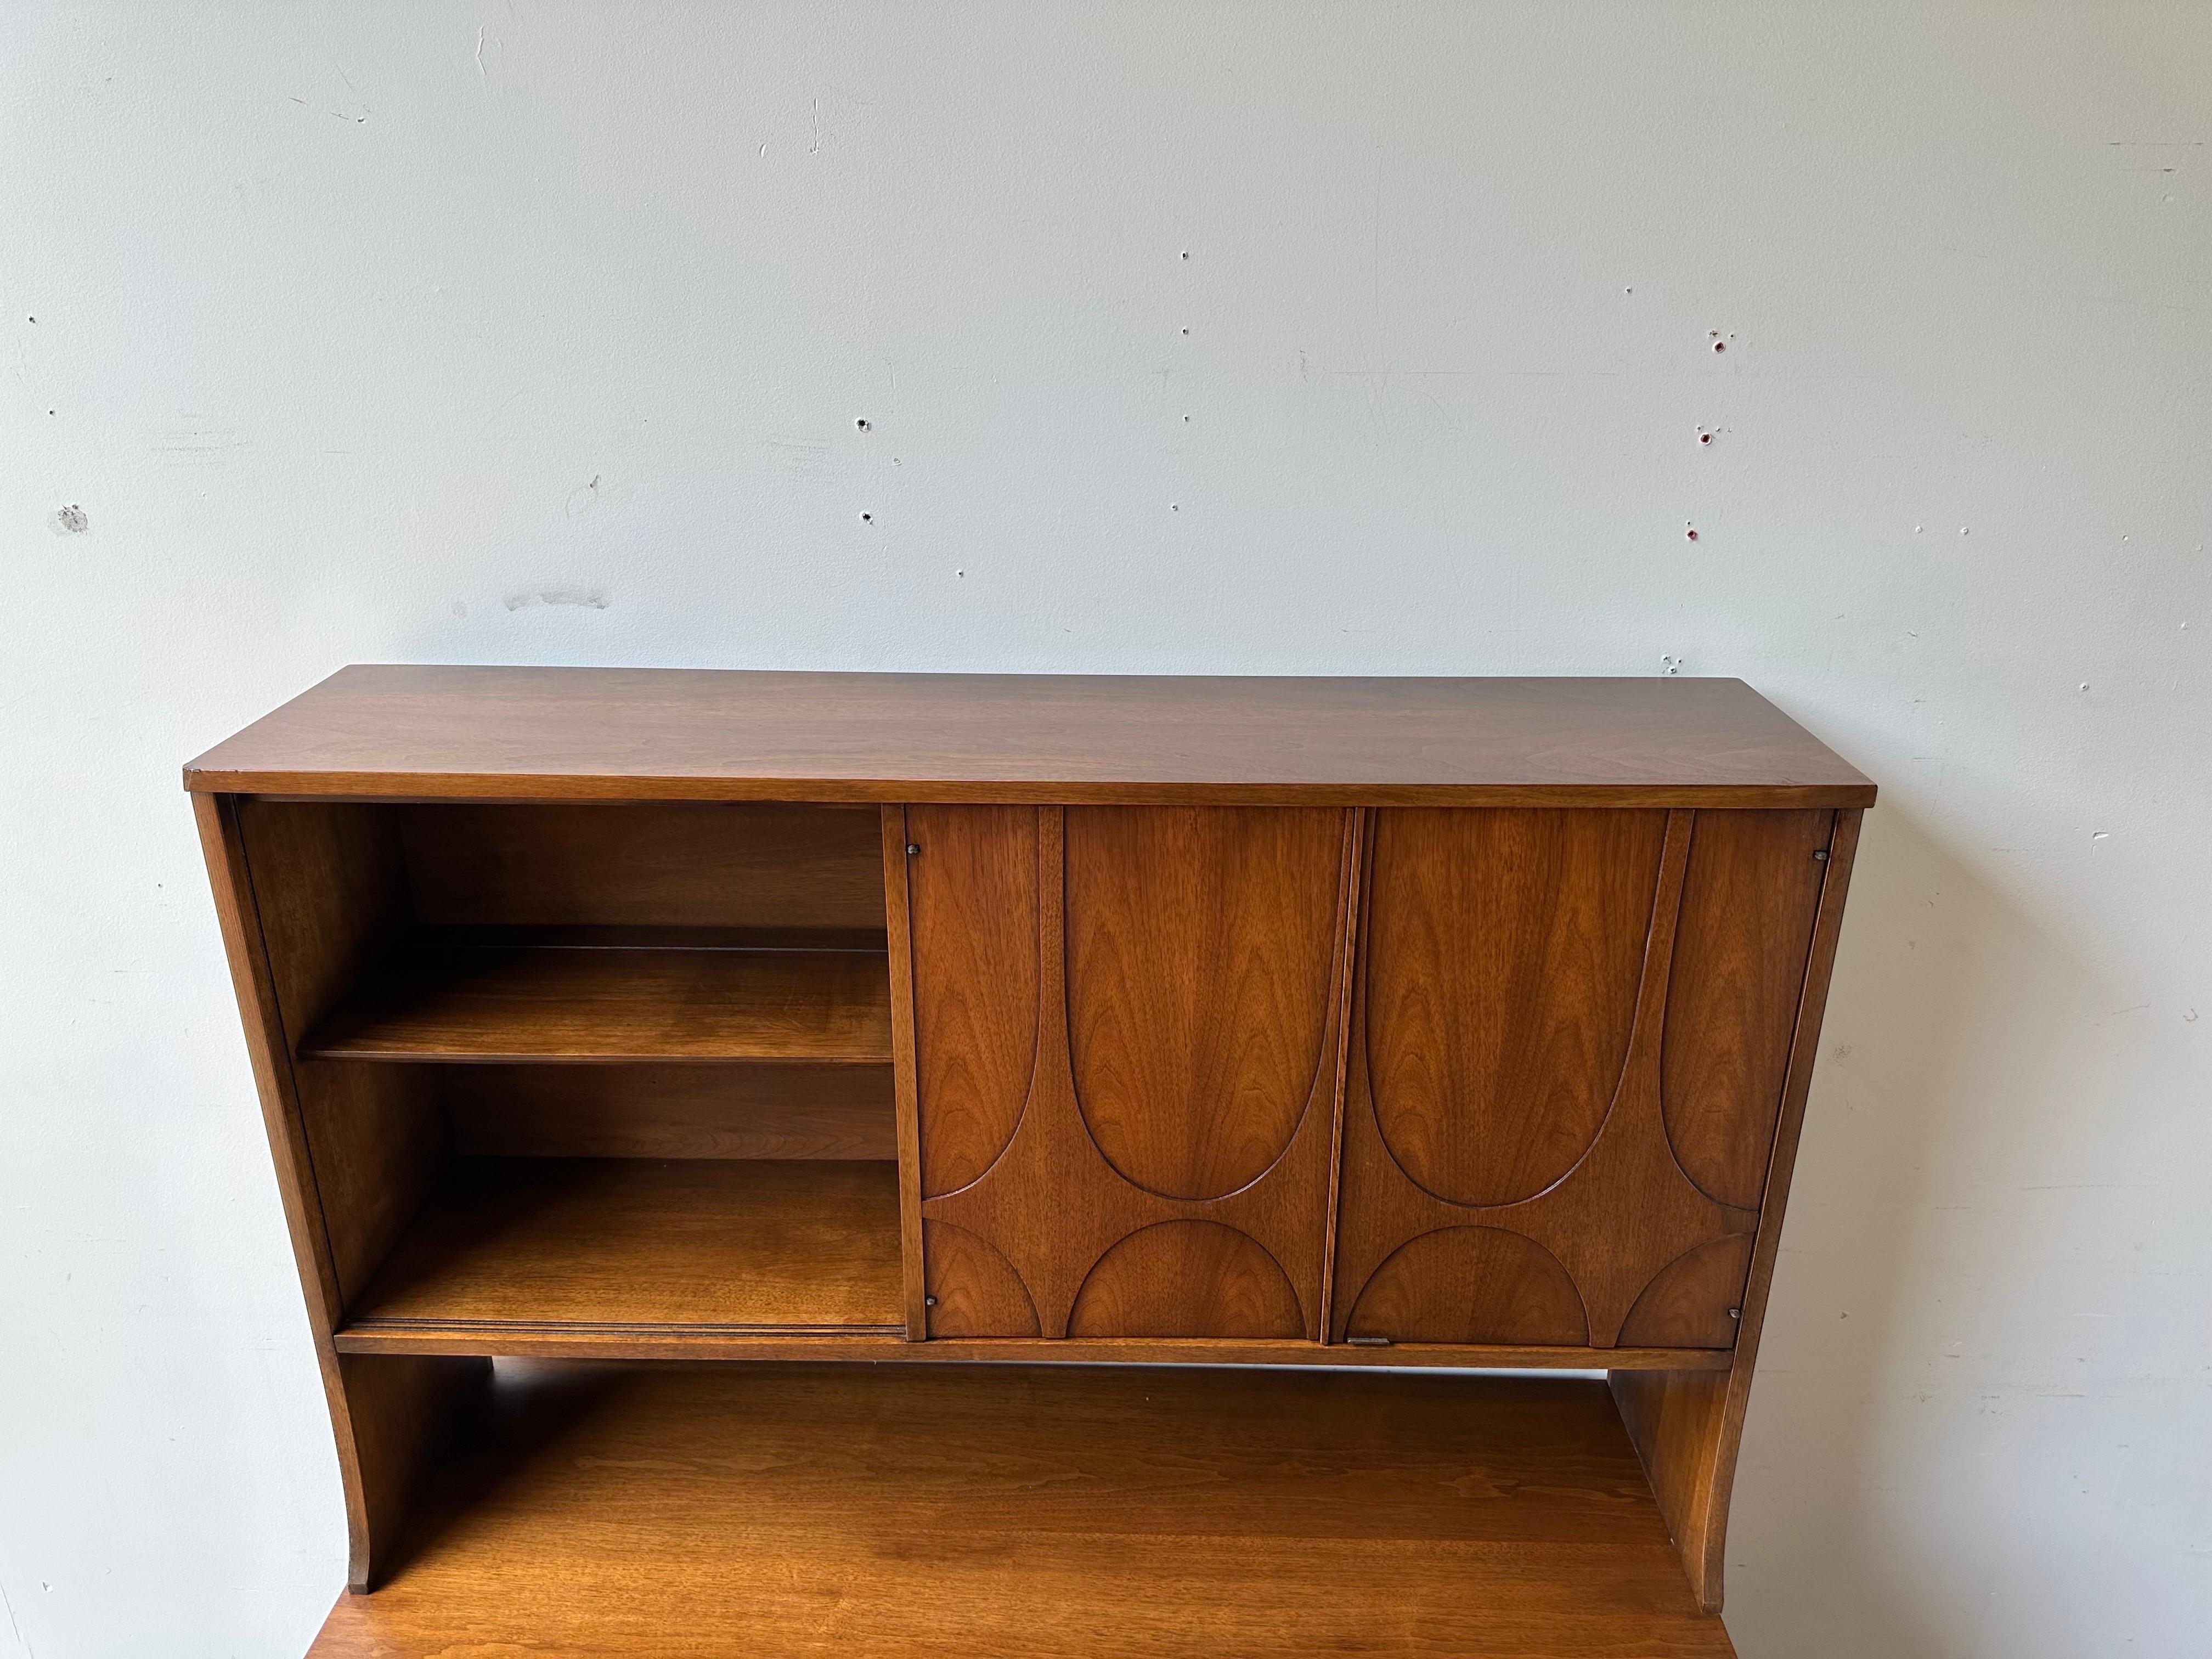 Woodwork Refinished Broyhill Brasilia Credenza with hutch